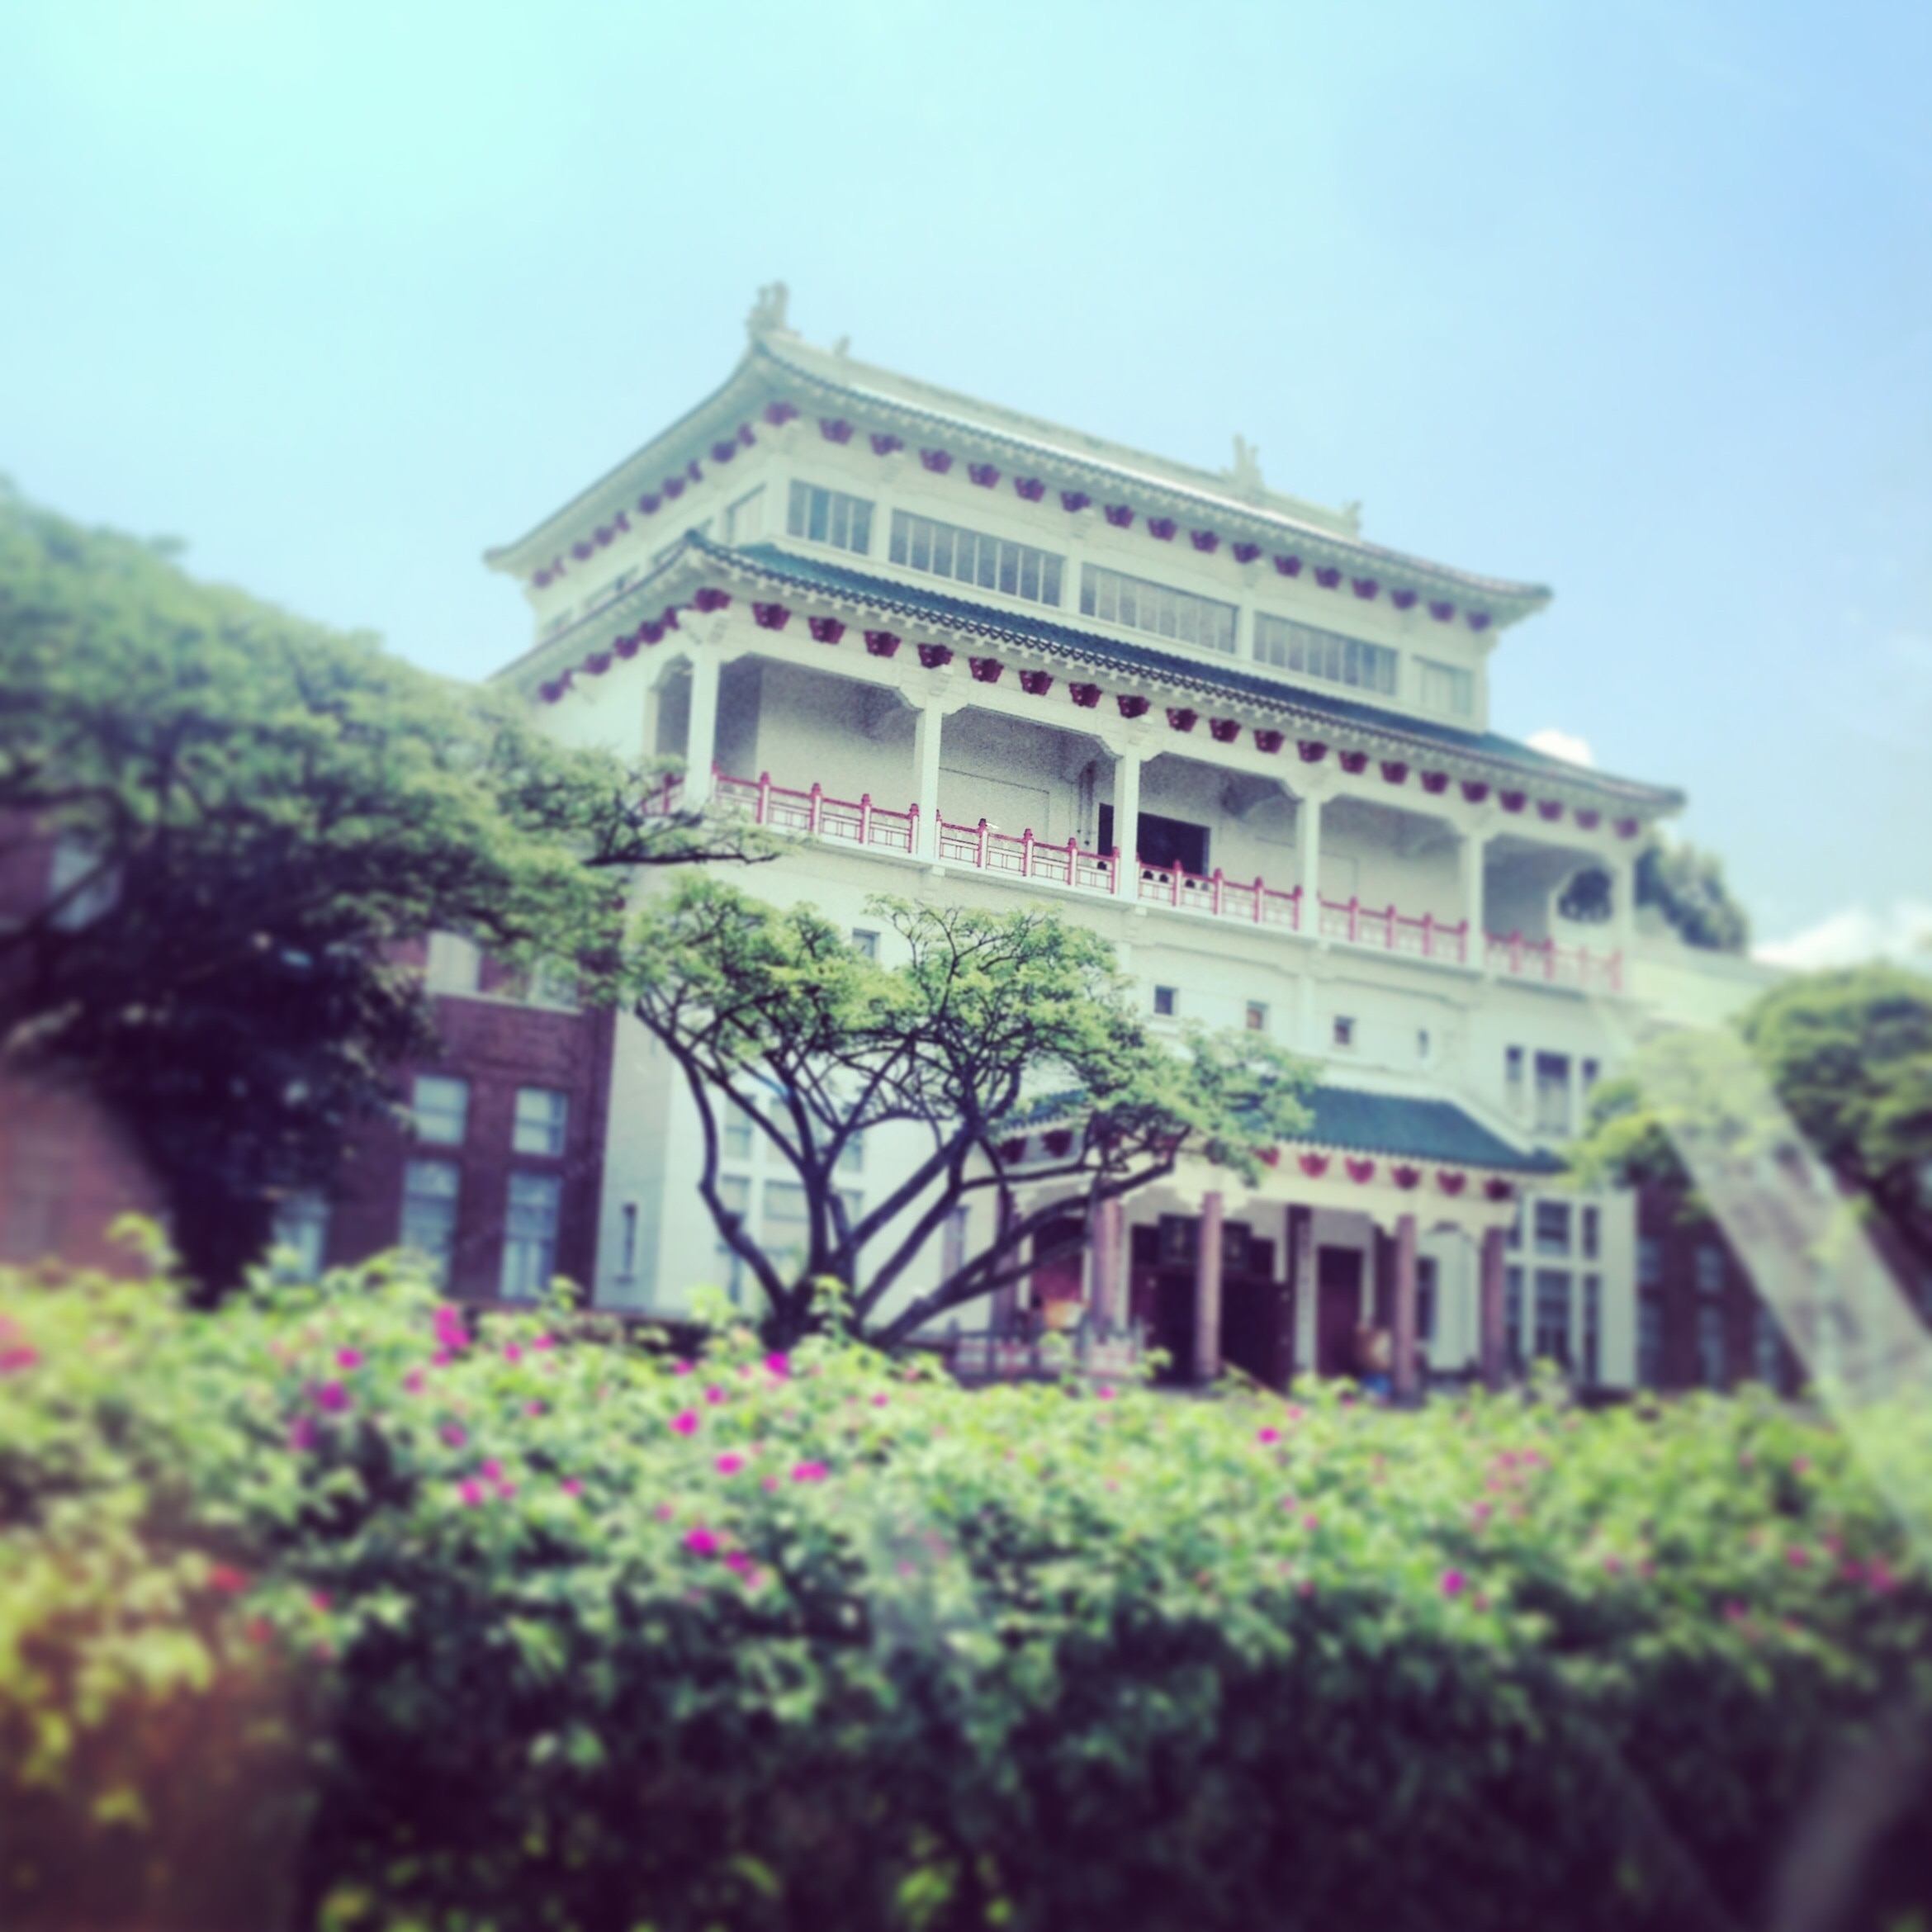 Chinese heritage center,where I took part time job before